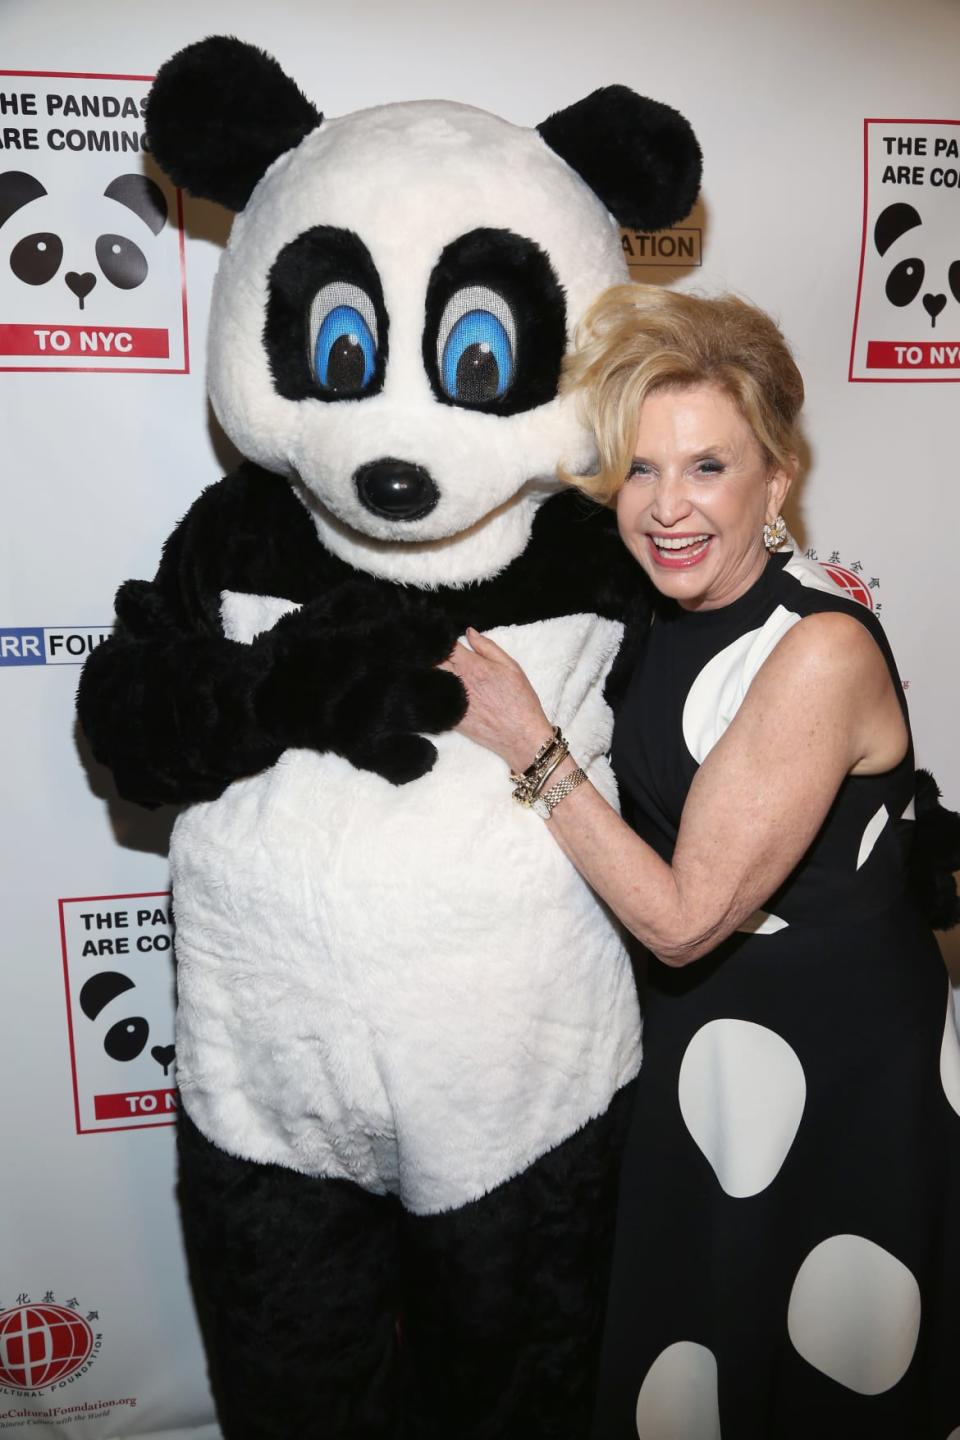 <div class="inline-image__caption"><p>Rep. Carolyn Maloney hugs a human panda at the first Annual Black & White Panda Ball in 2017. </p></div> <div class="inline-image__credit">Sylvain Gaboury/Getty</div>